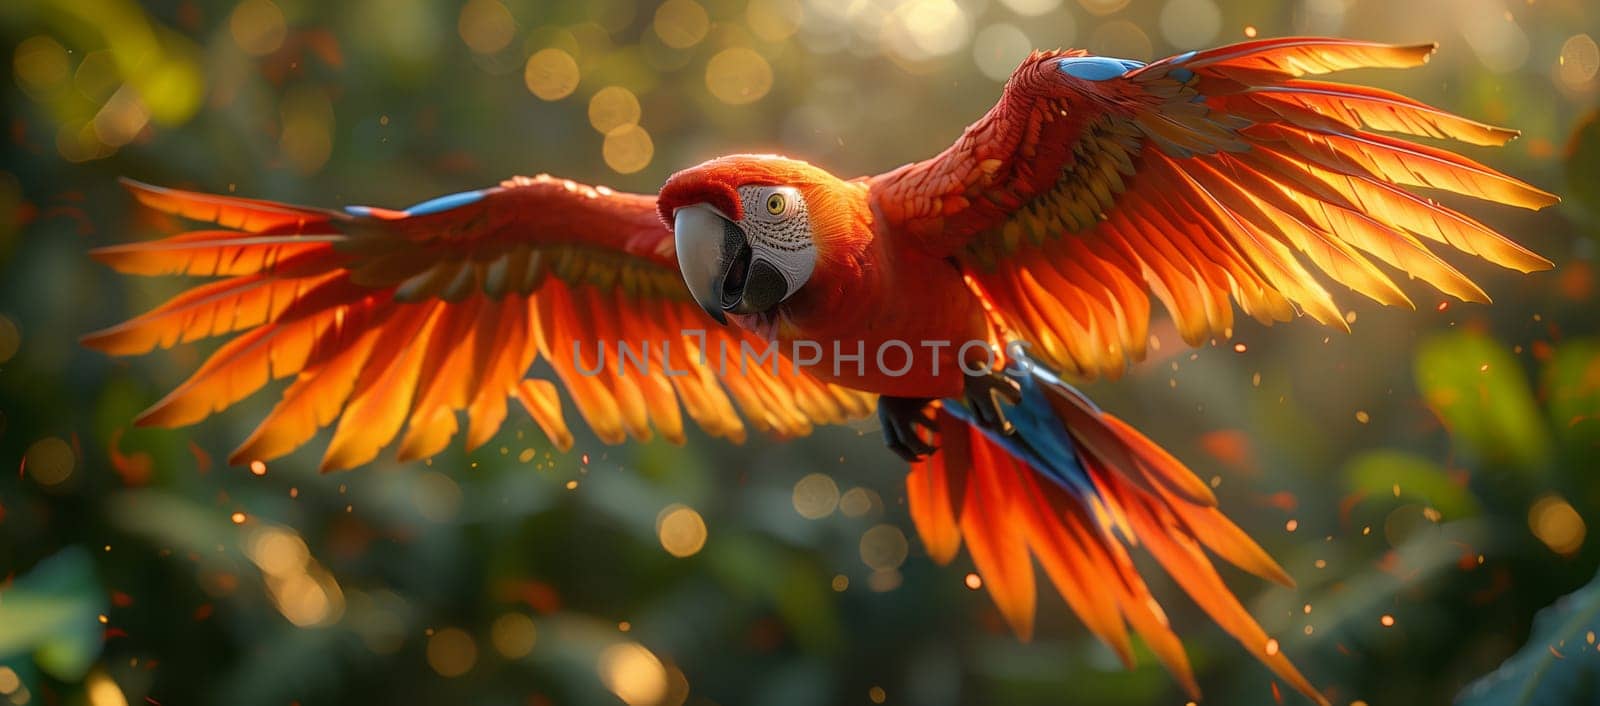 A vibrant red parrot soars through the sky, showcasing its beautiful feathers and spread wings, blending into the natural landscape